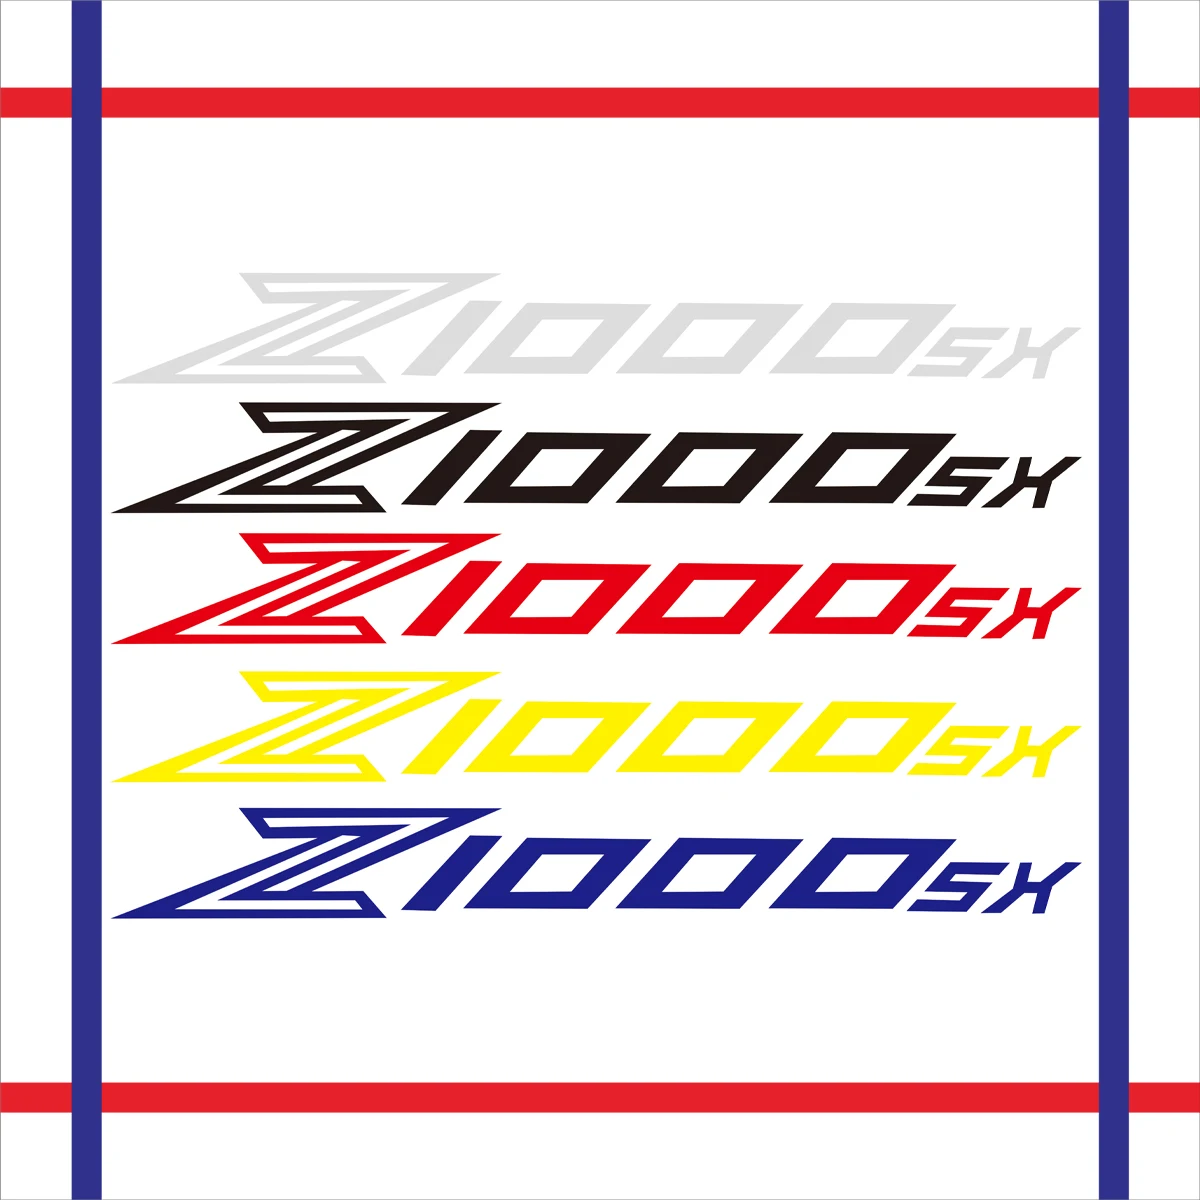 2PCS Reflective Motorcycle Wheels Fairing Helmet Tank Pad Decoration Logo Accessories Stickers Decals For KAWASAKI Z1000SX motorcycle fuel gas tank cap cover lock 2pcs keys for honda vfr 750 800 vfr750 vfr800 not includ ignition seat handle locks